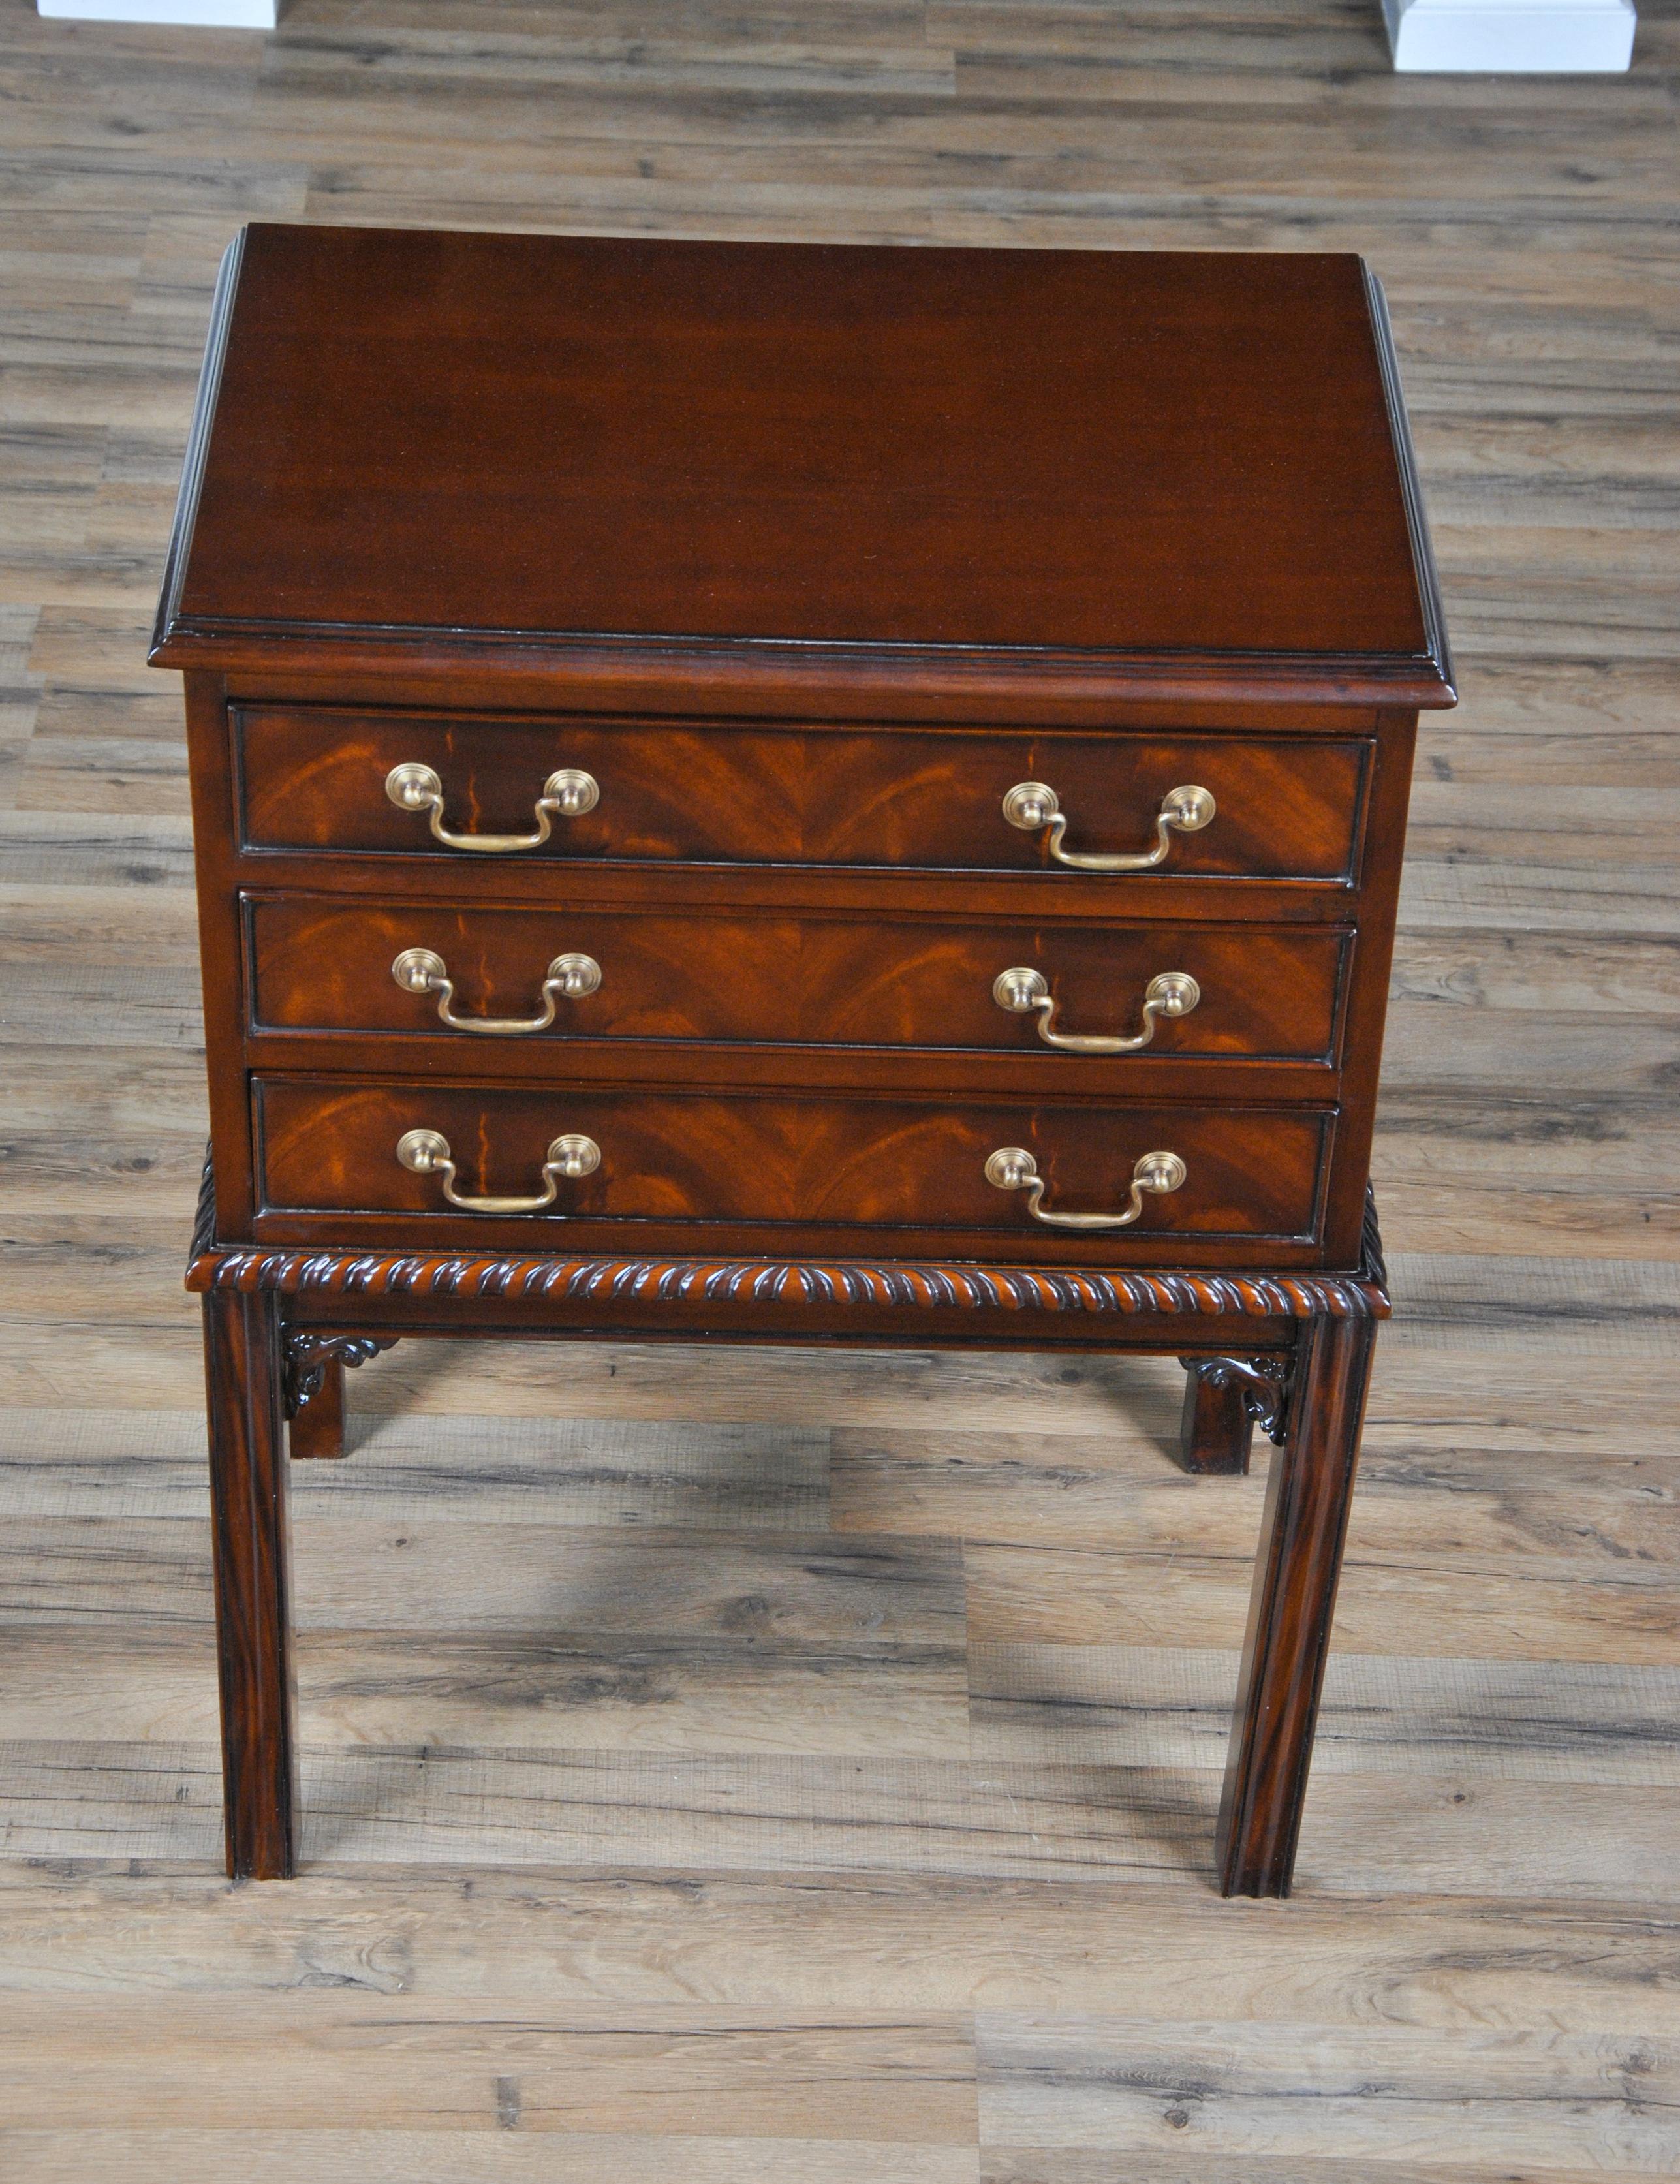 Our most popular mahogany night stand. A fine quality mahogany nightstand, simple yet beautifully detailed. The three wide drawers over top square reeded legs, adorned with hand carved details. Dovetailed drawers for strength and durability.